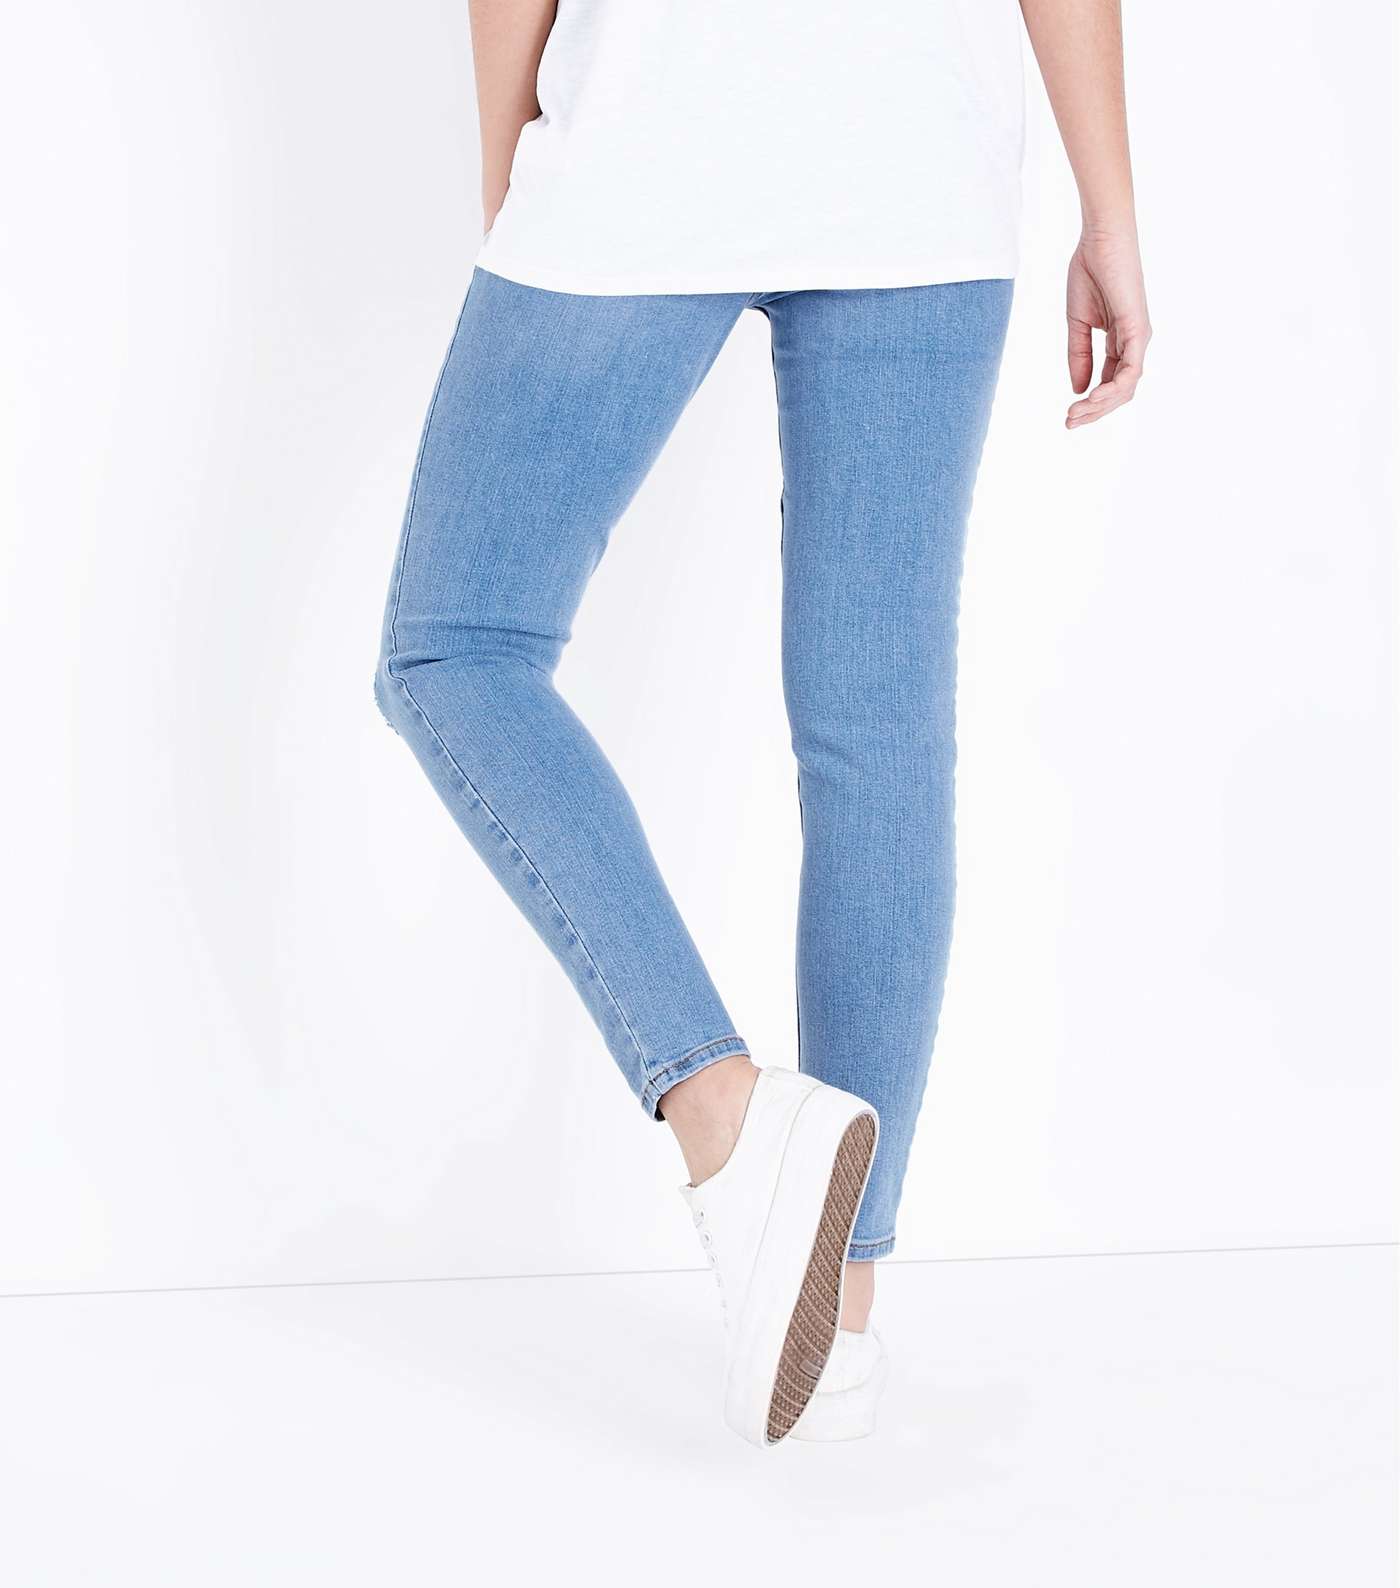 Maternity Pale Blue Light Wash Over Bump Jeans Image 3